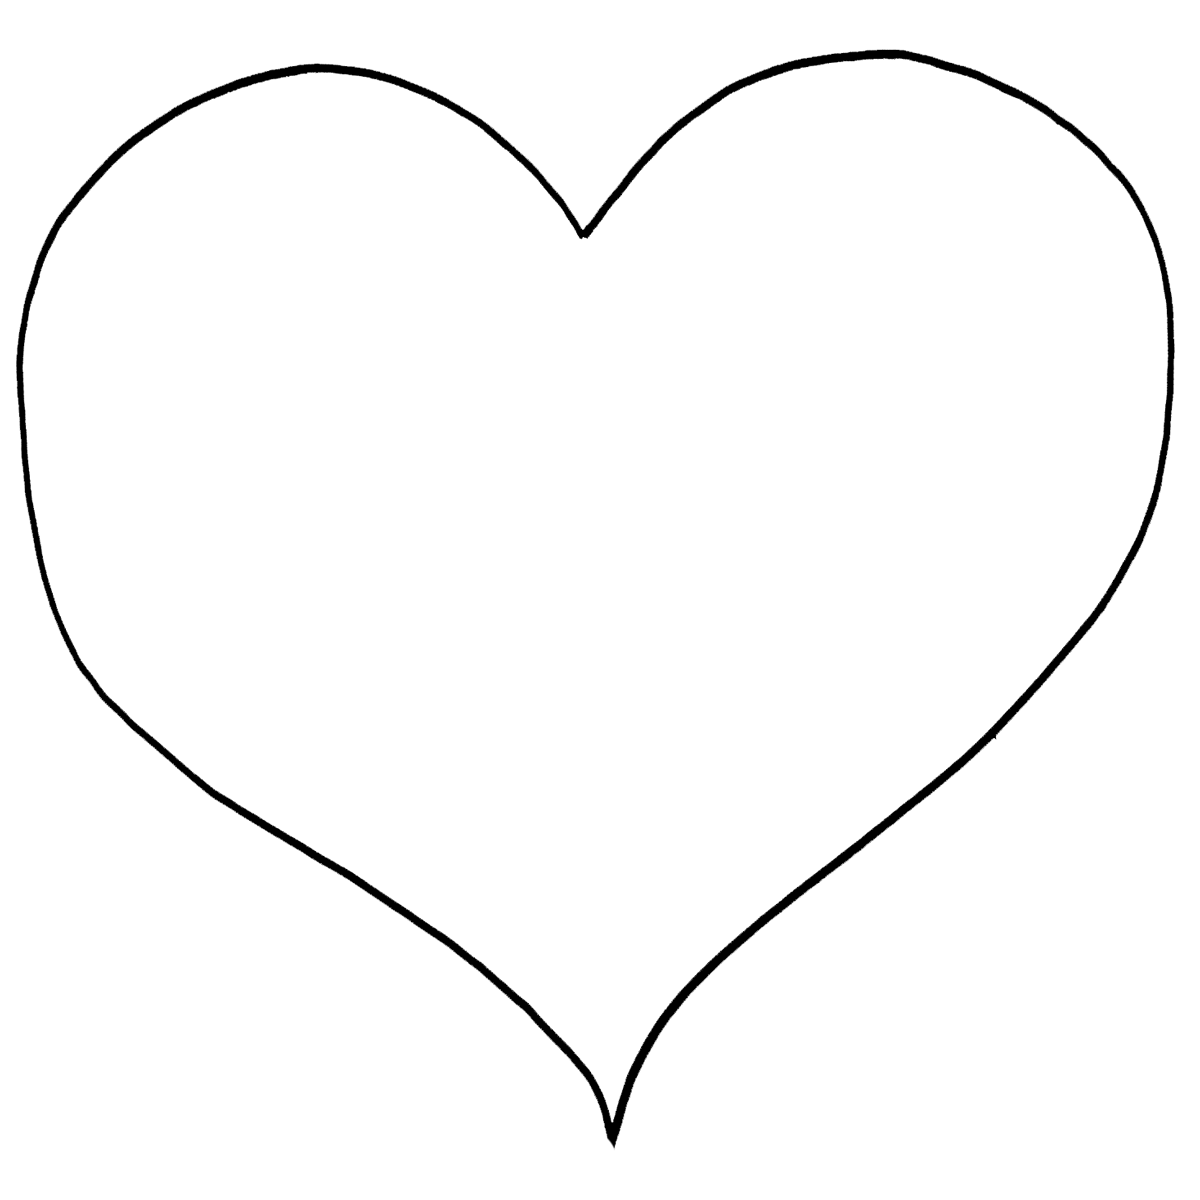 coloring pages for hearts free printable heart coloring pages for kids hearts for coloring pages 